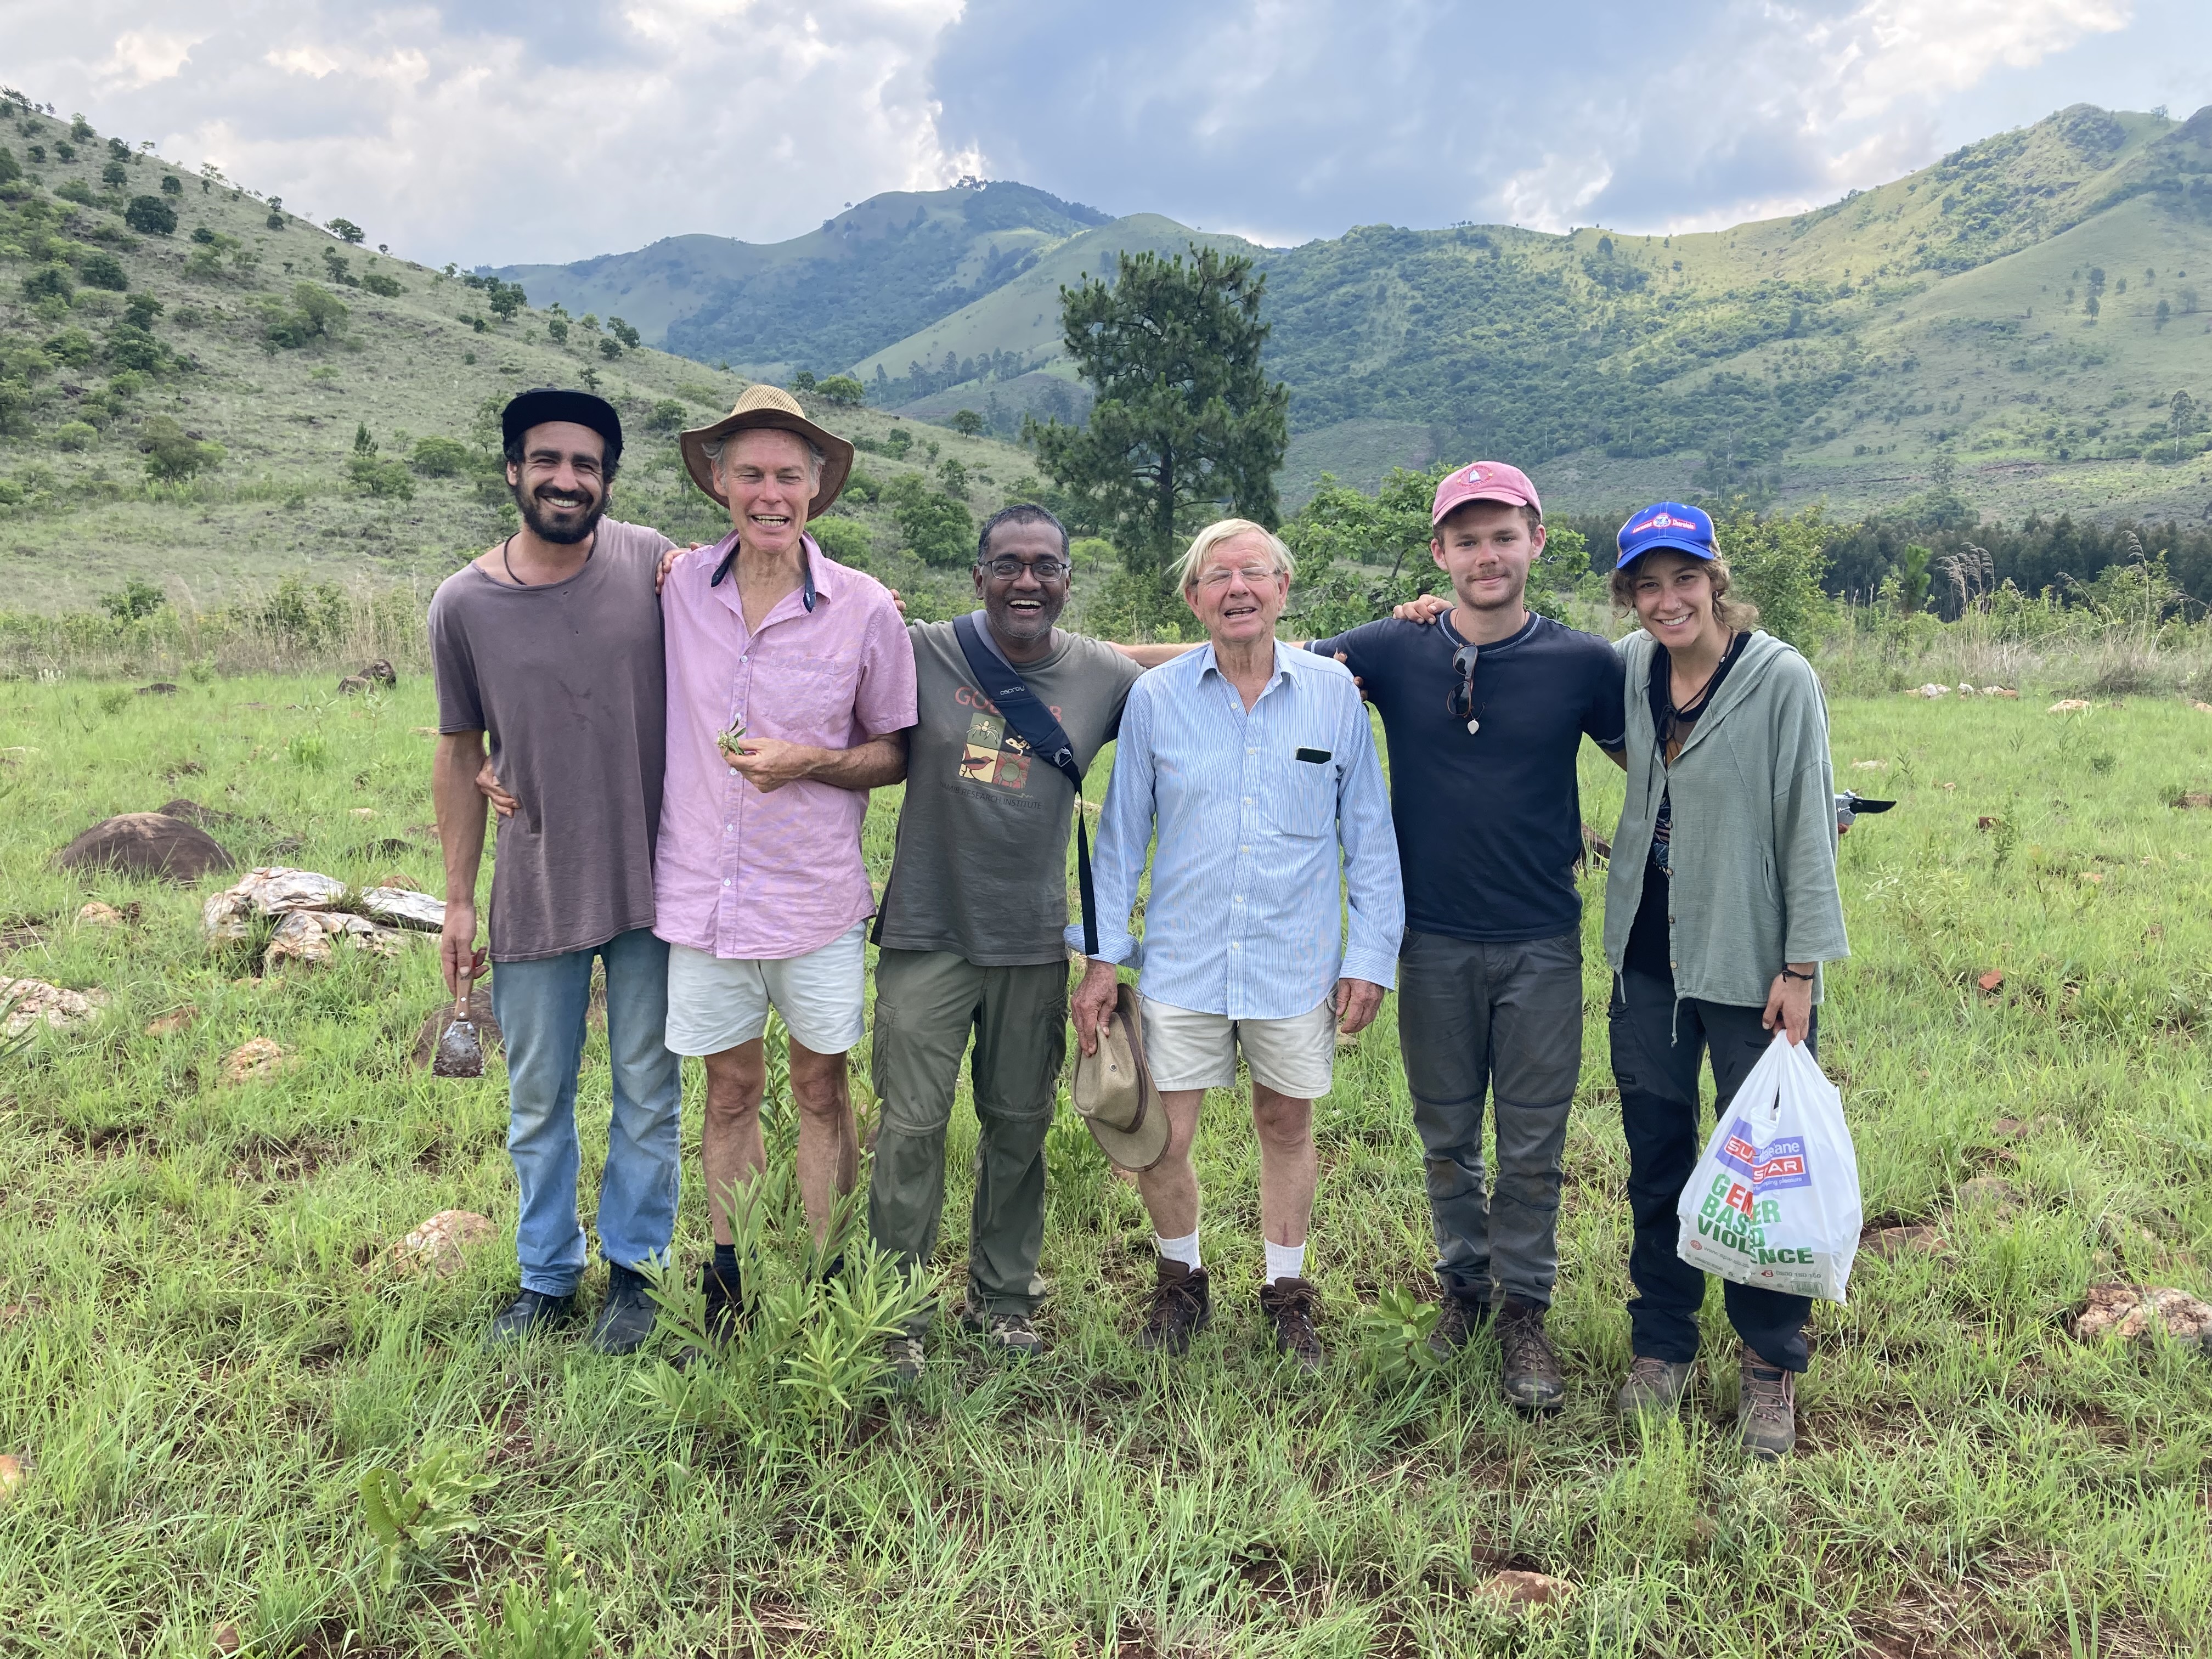 Professor Nishi Rajakaruna and student TJ Samojedny posing with a group of colleagues in a field surrounded by mountains in South Africa.